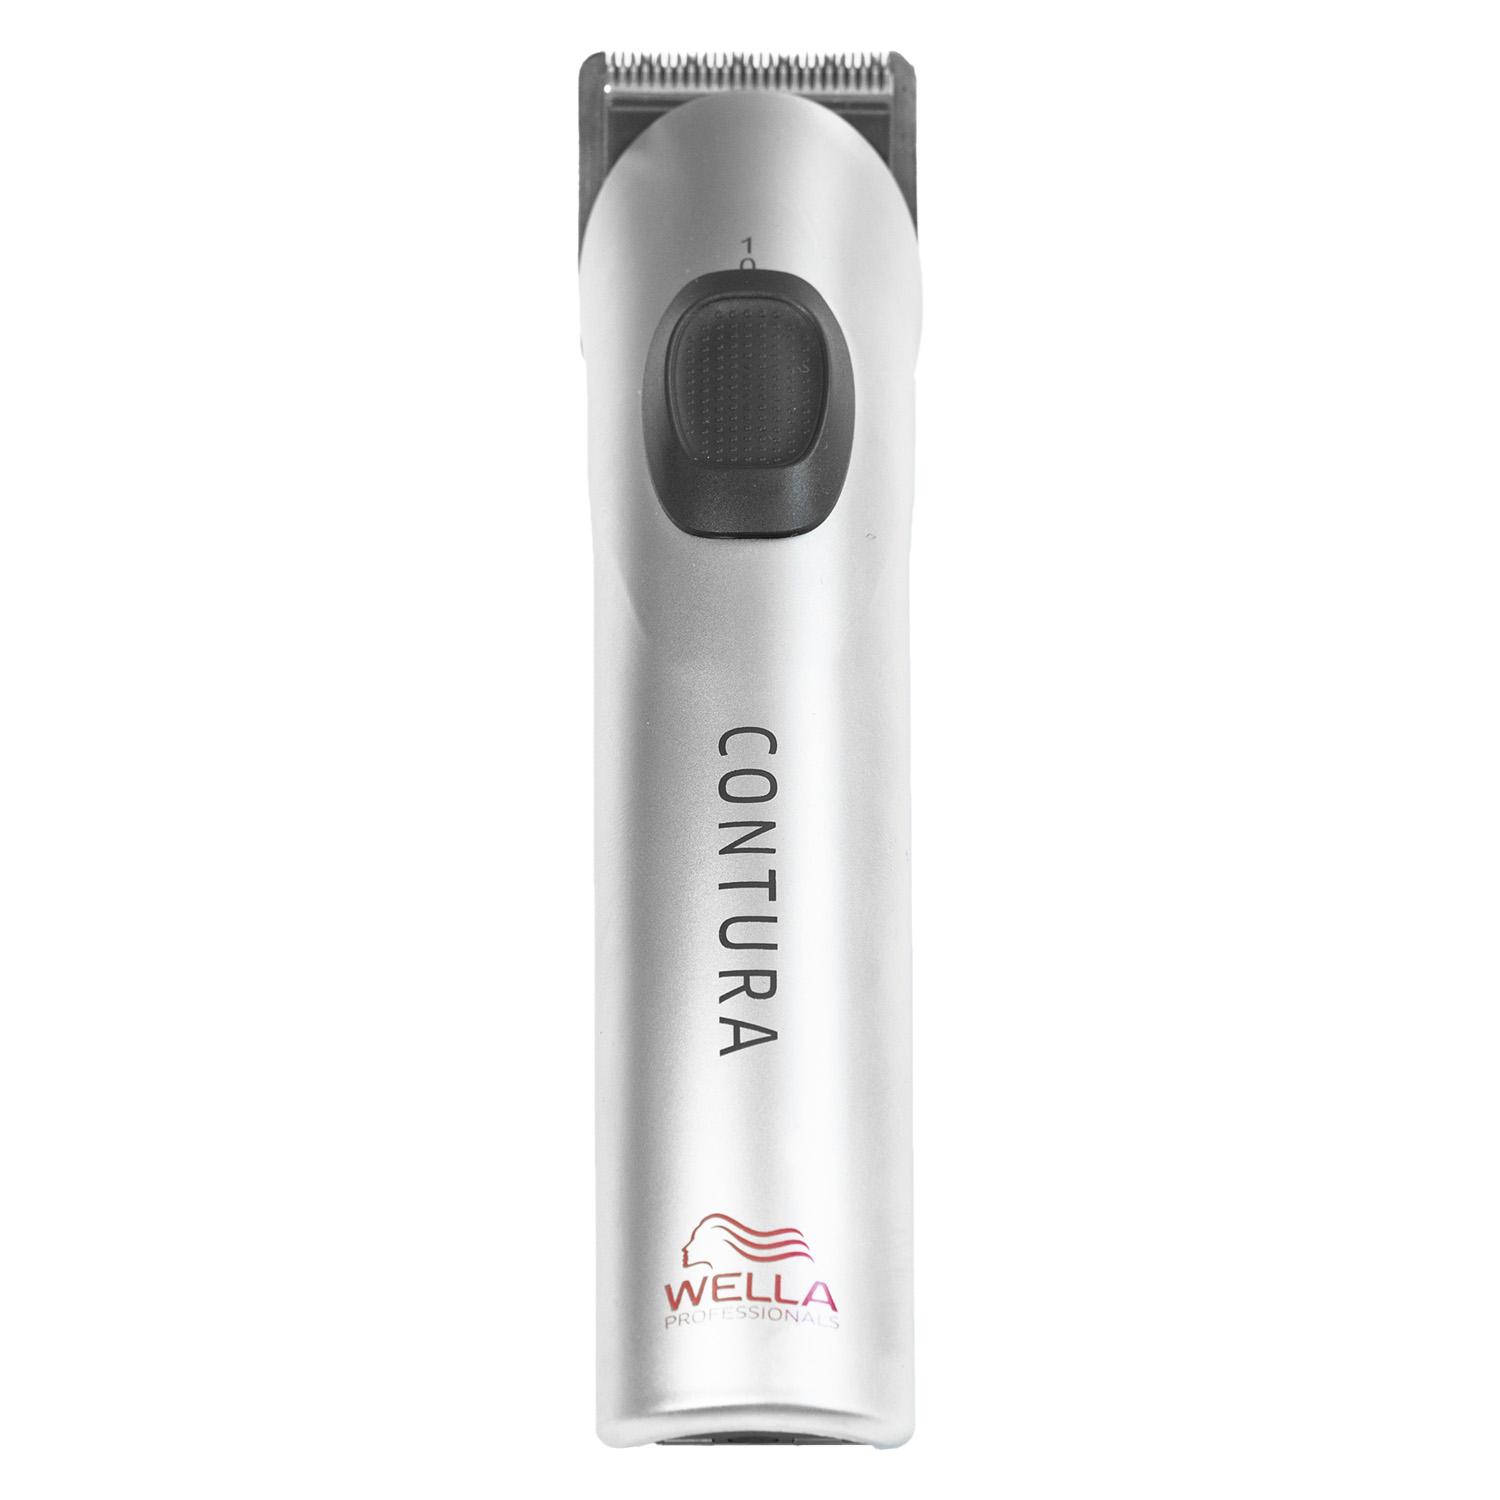 Wella Tools - Contura Hairtrimmer